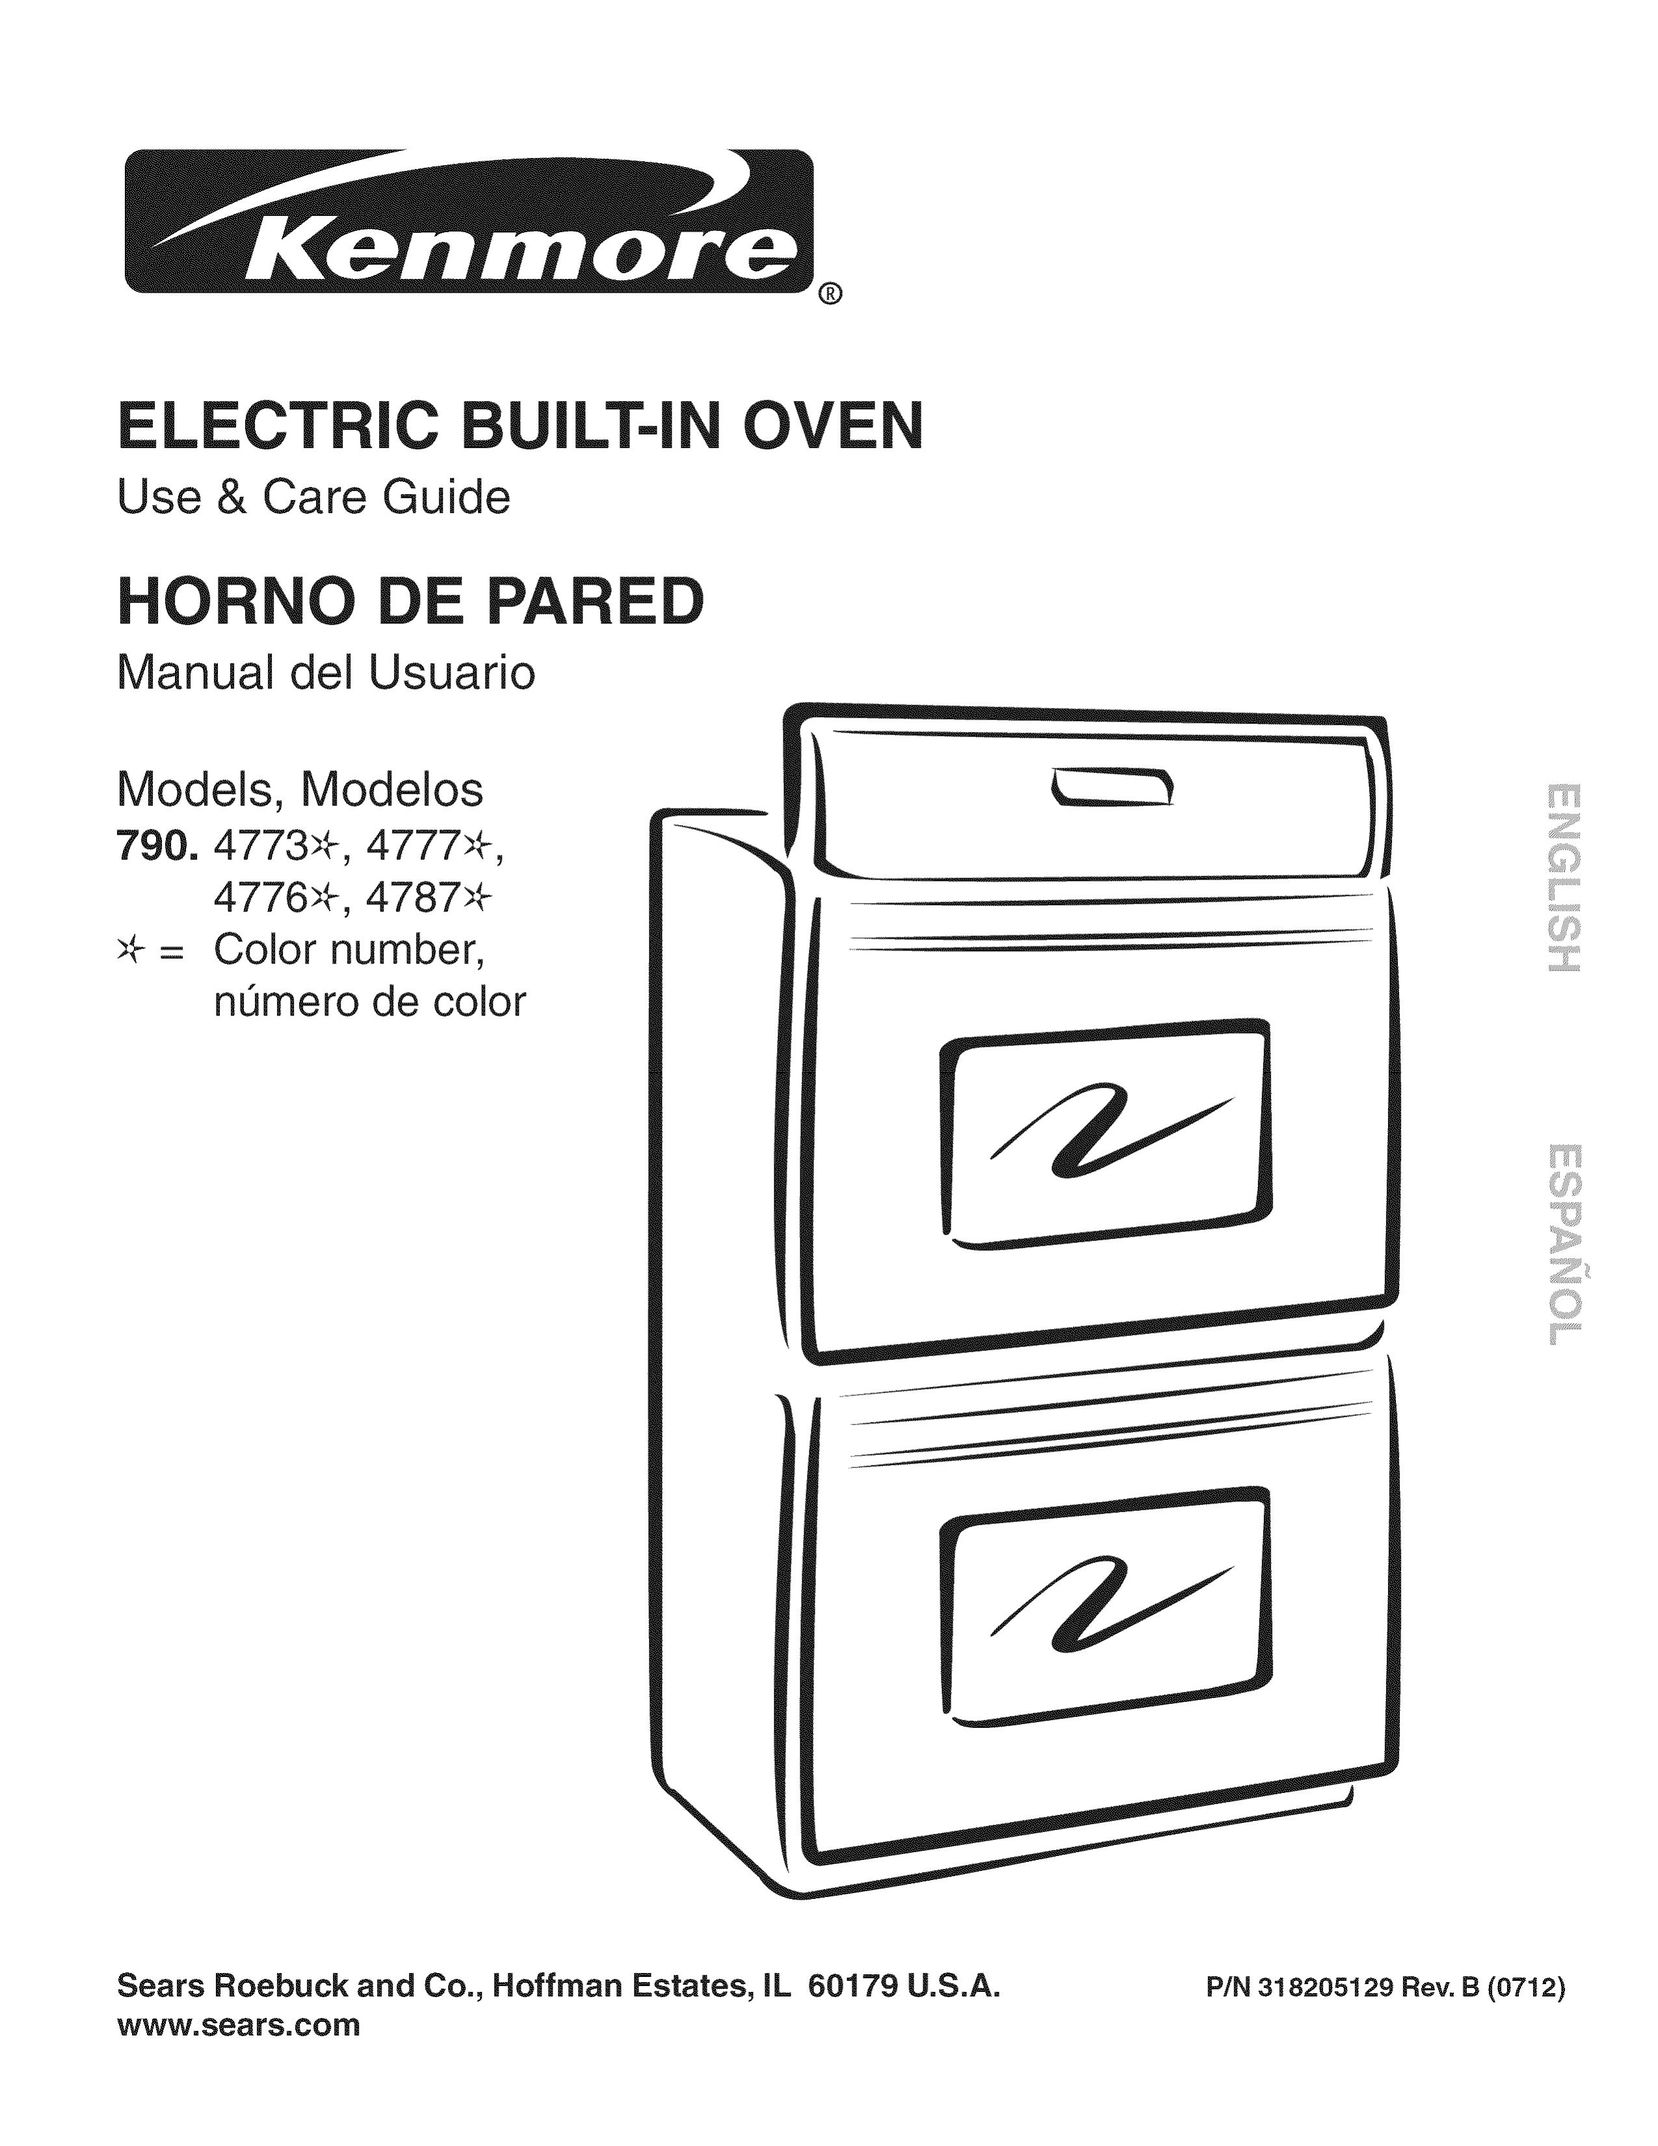 Kenmore 790.4773 Convection Oven User Manual